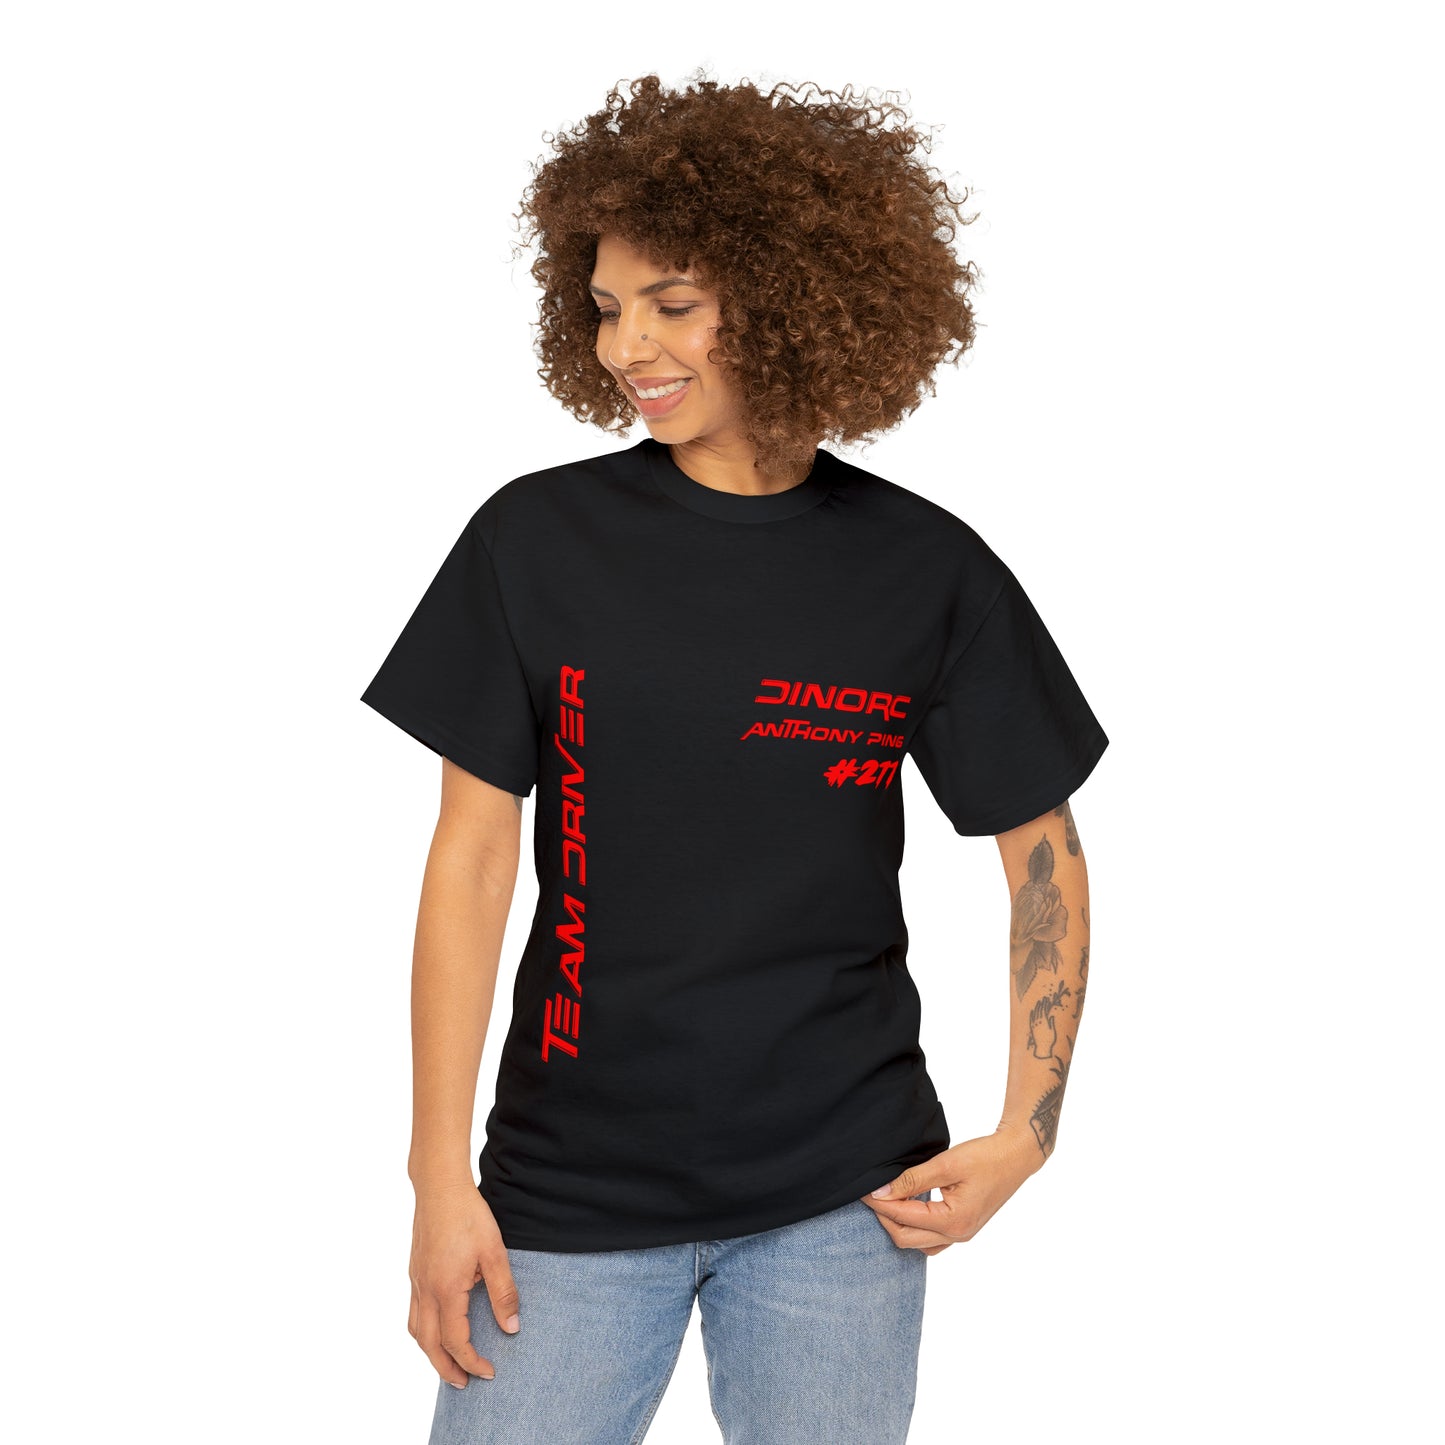 Anthony Ping Team Driver  DinoRc logo Front and Back DinoRc Logo T-Shirt S-5x 5 colors